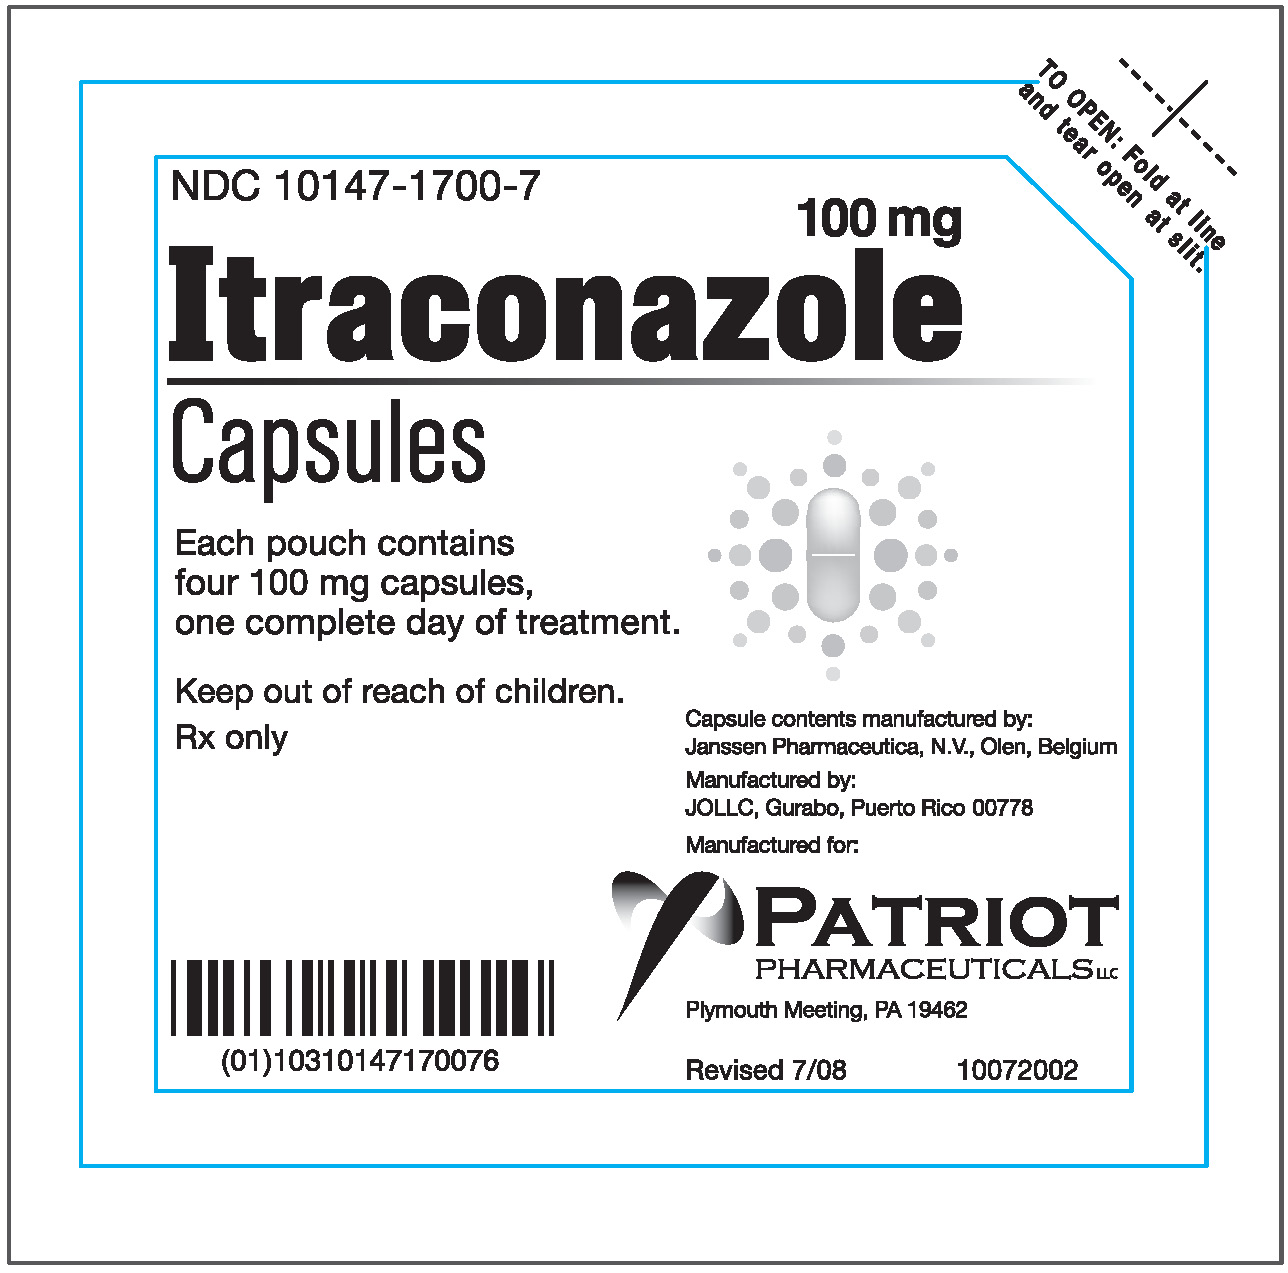 Itraconazole Capsules - Front Panel of Pouch